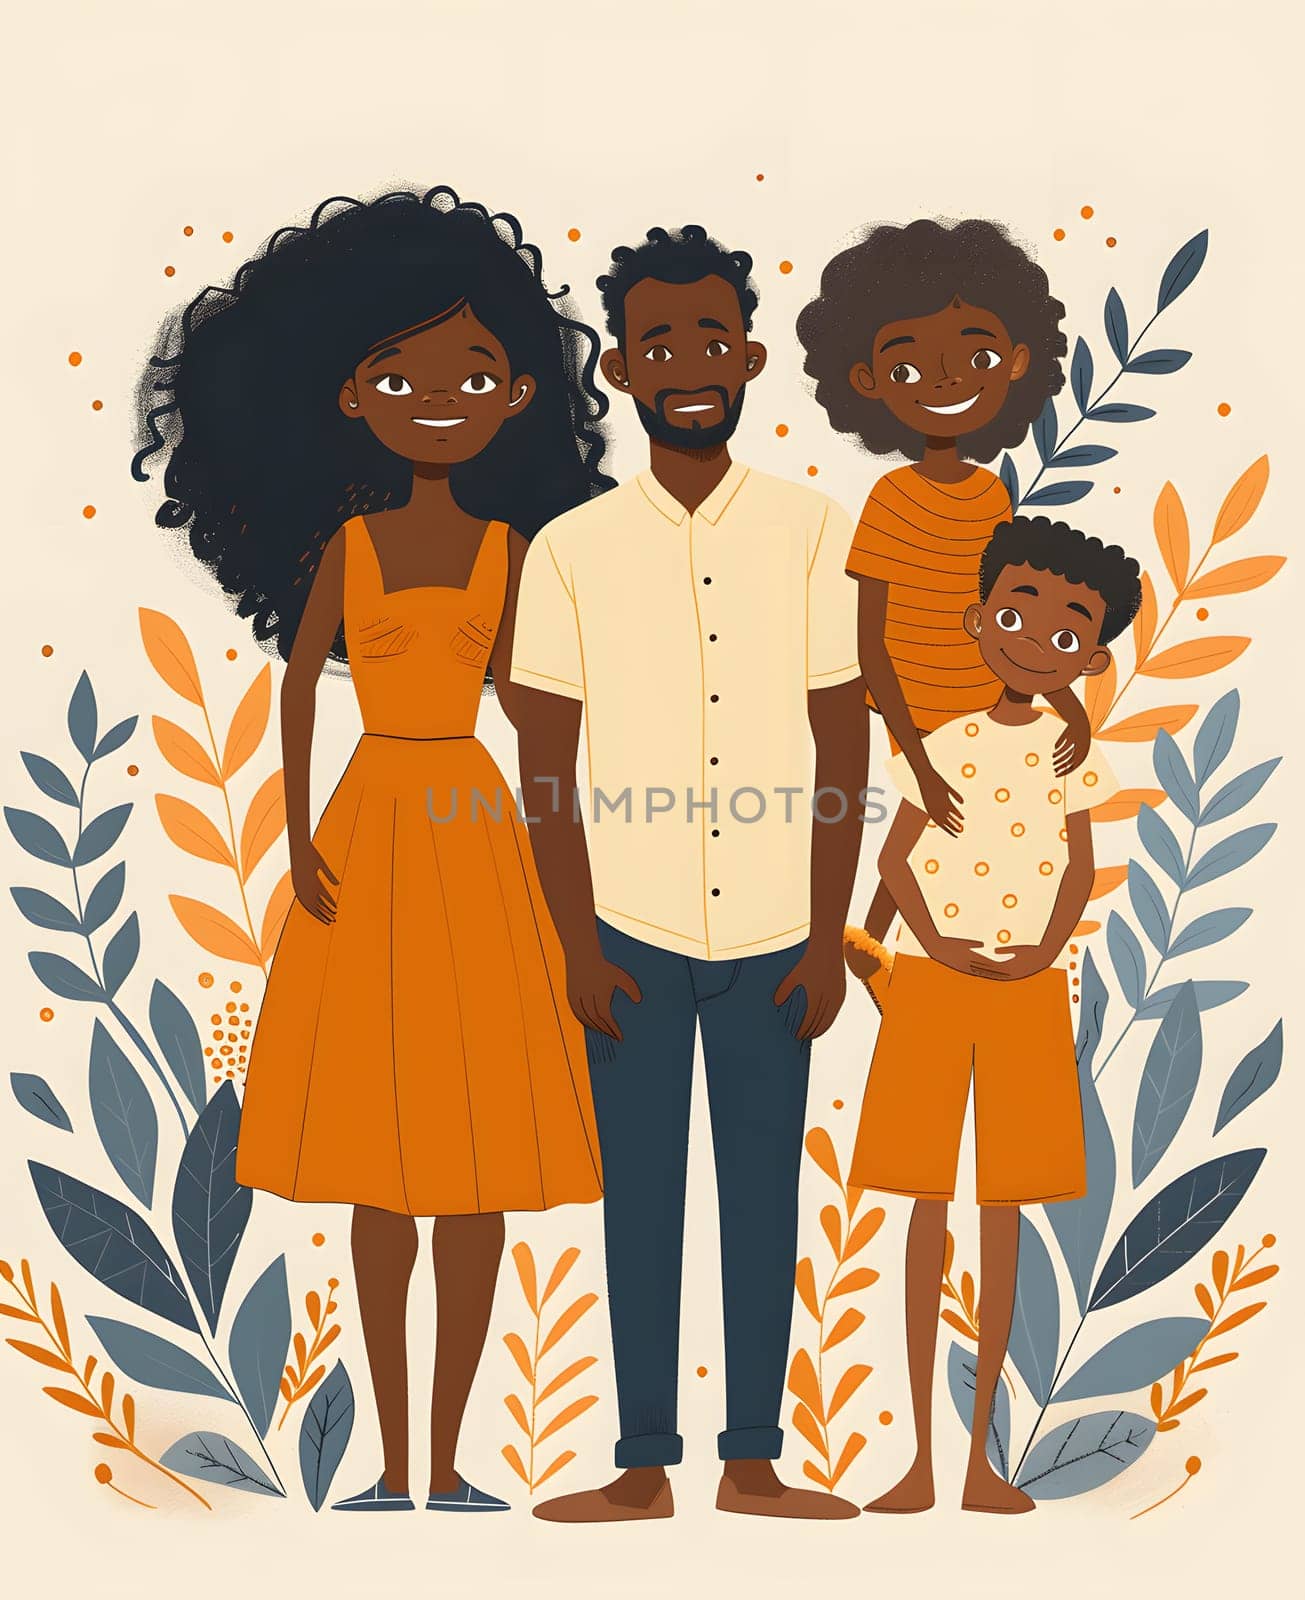 a cartoon illustration of a family standing next to each other by Nadtochiy